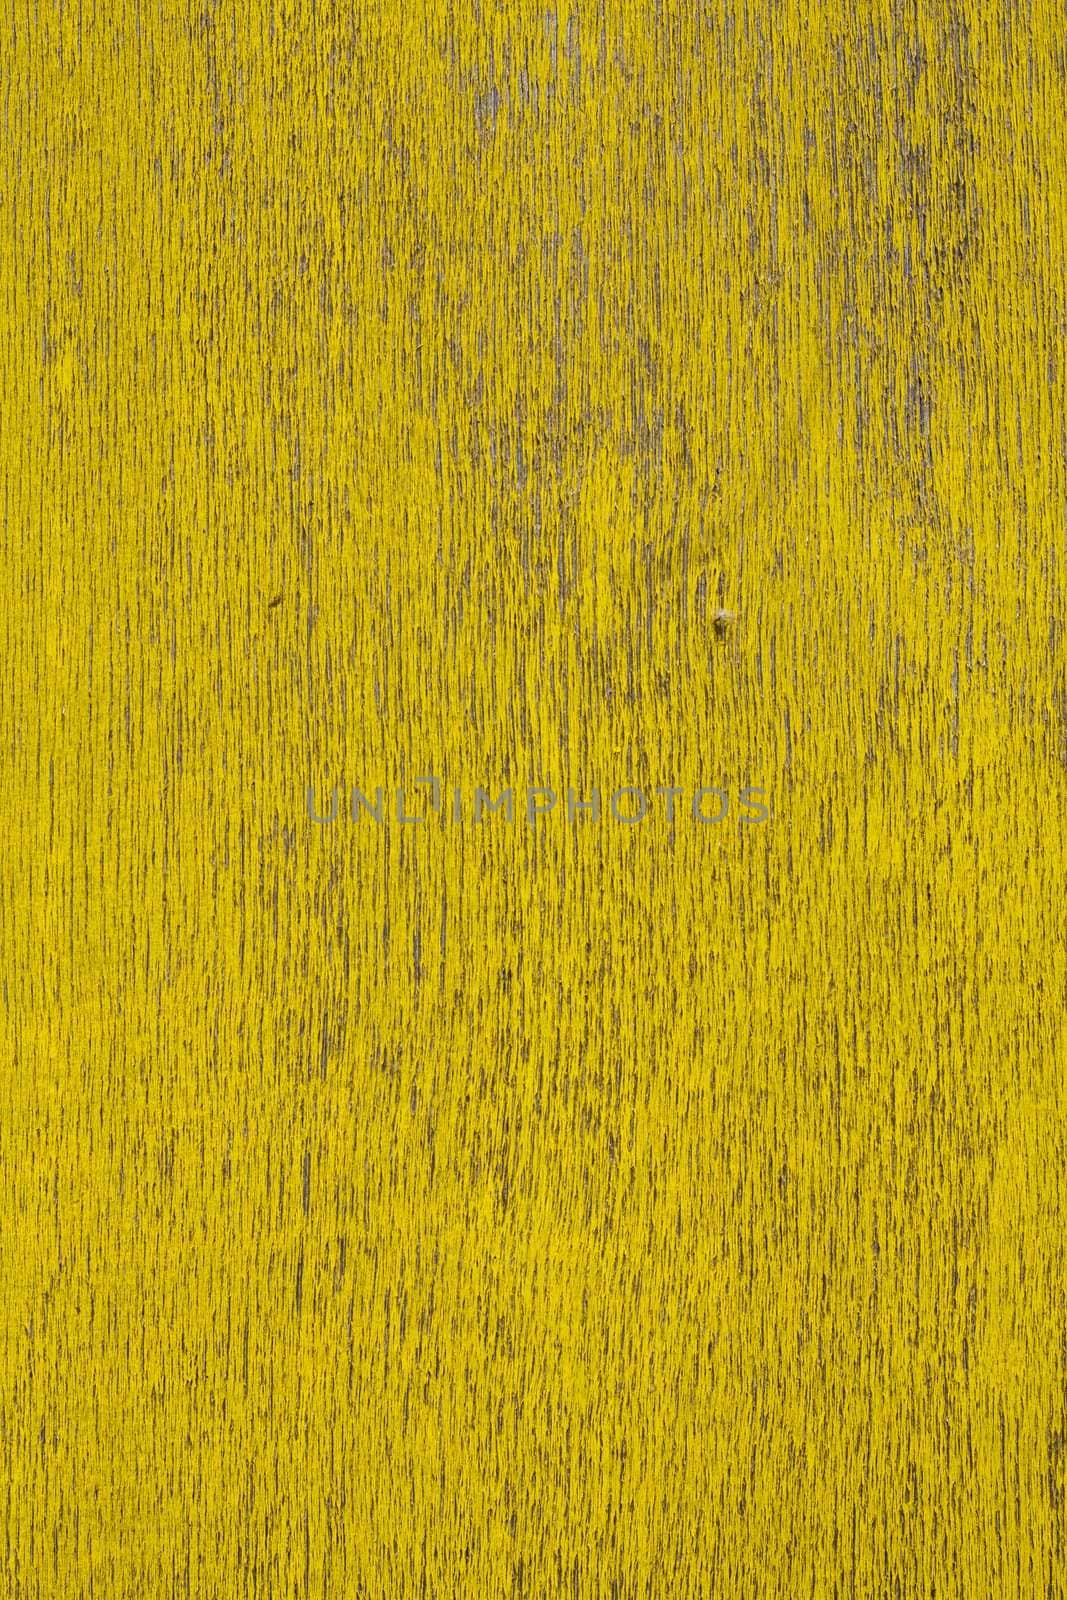 Close up view of a peeled yellow wooden textured wall.